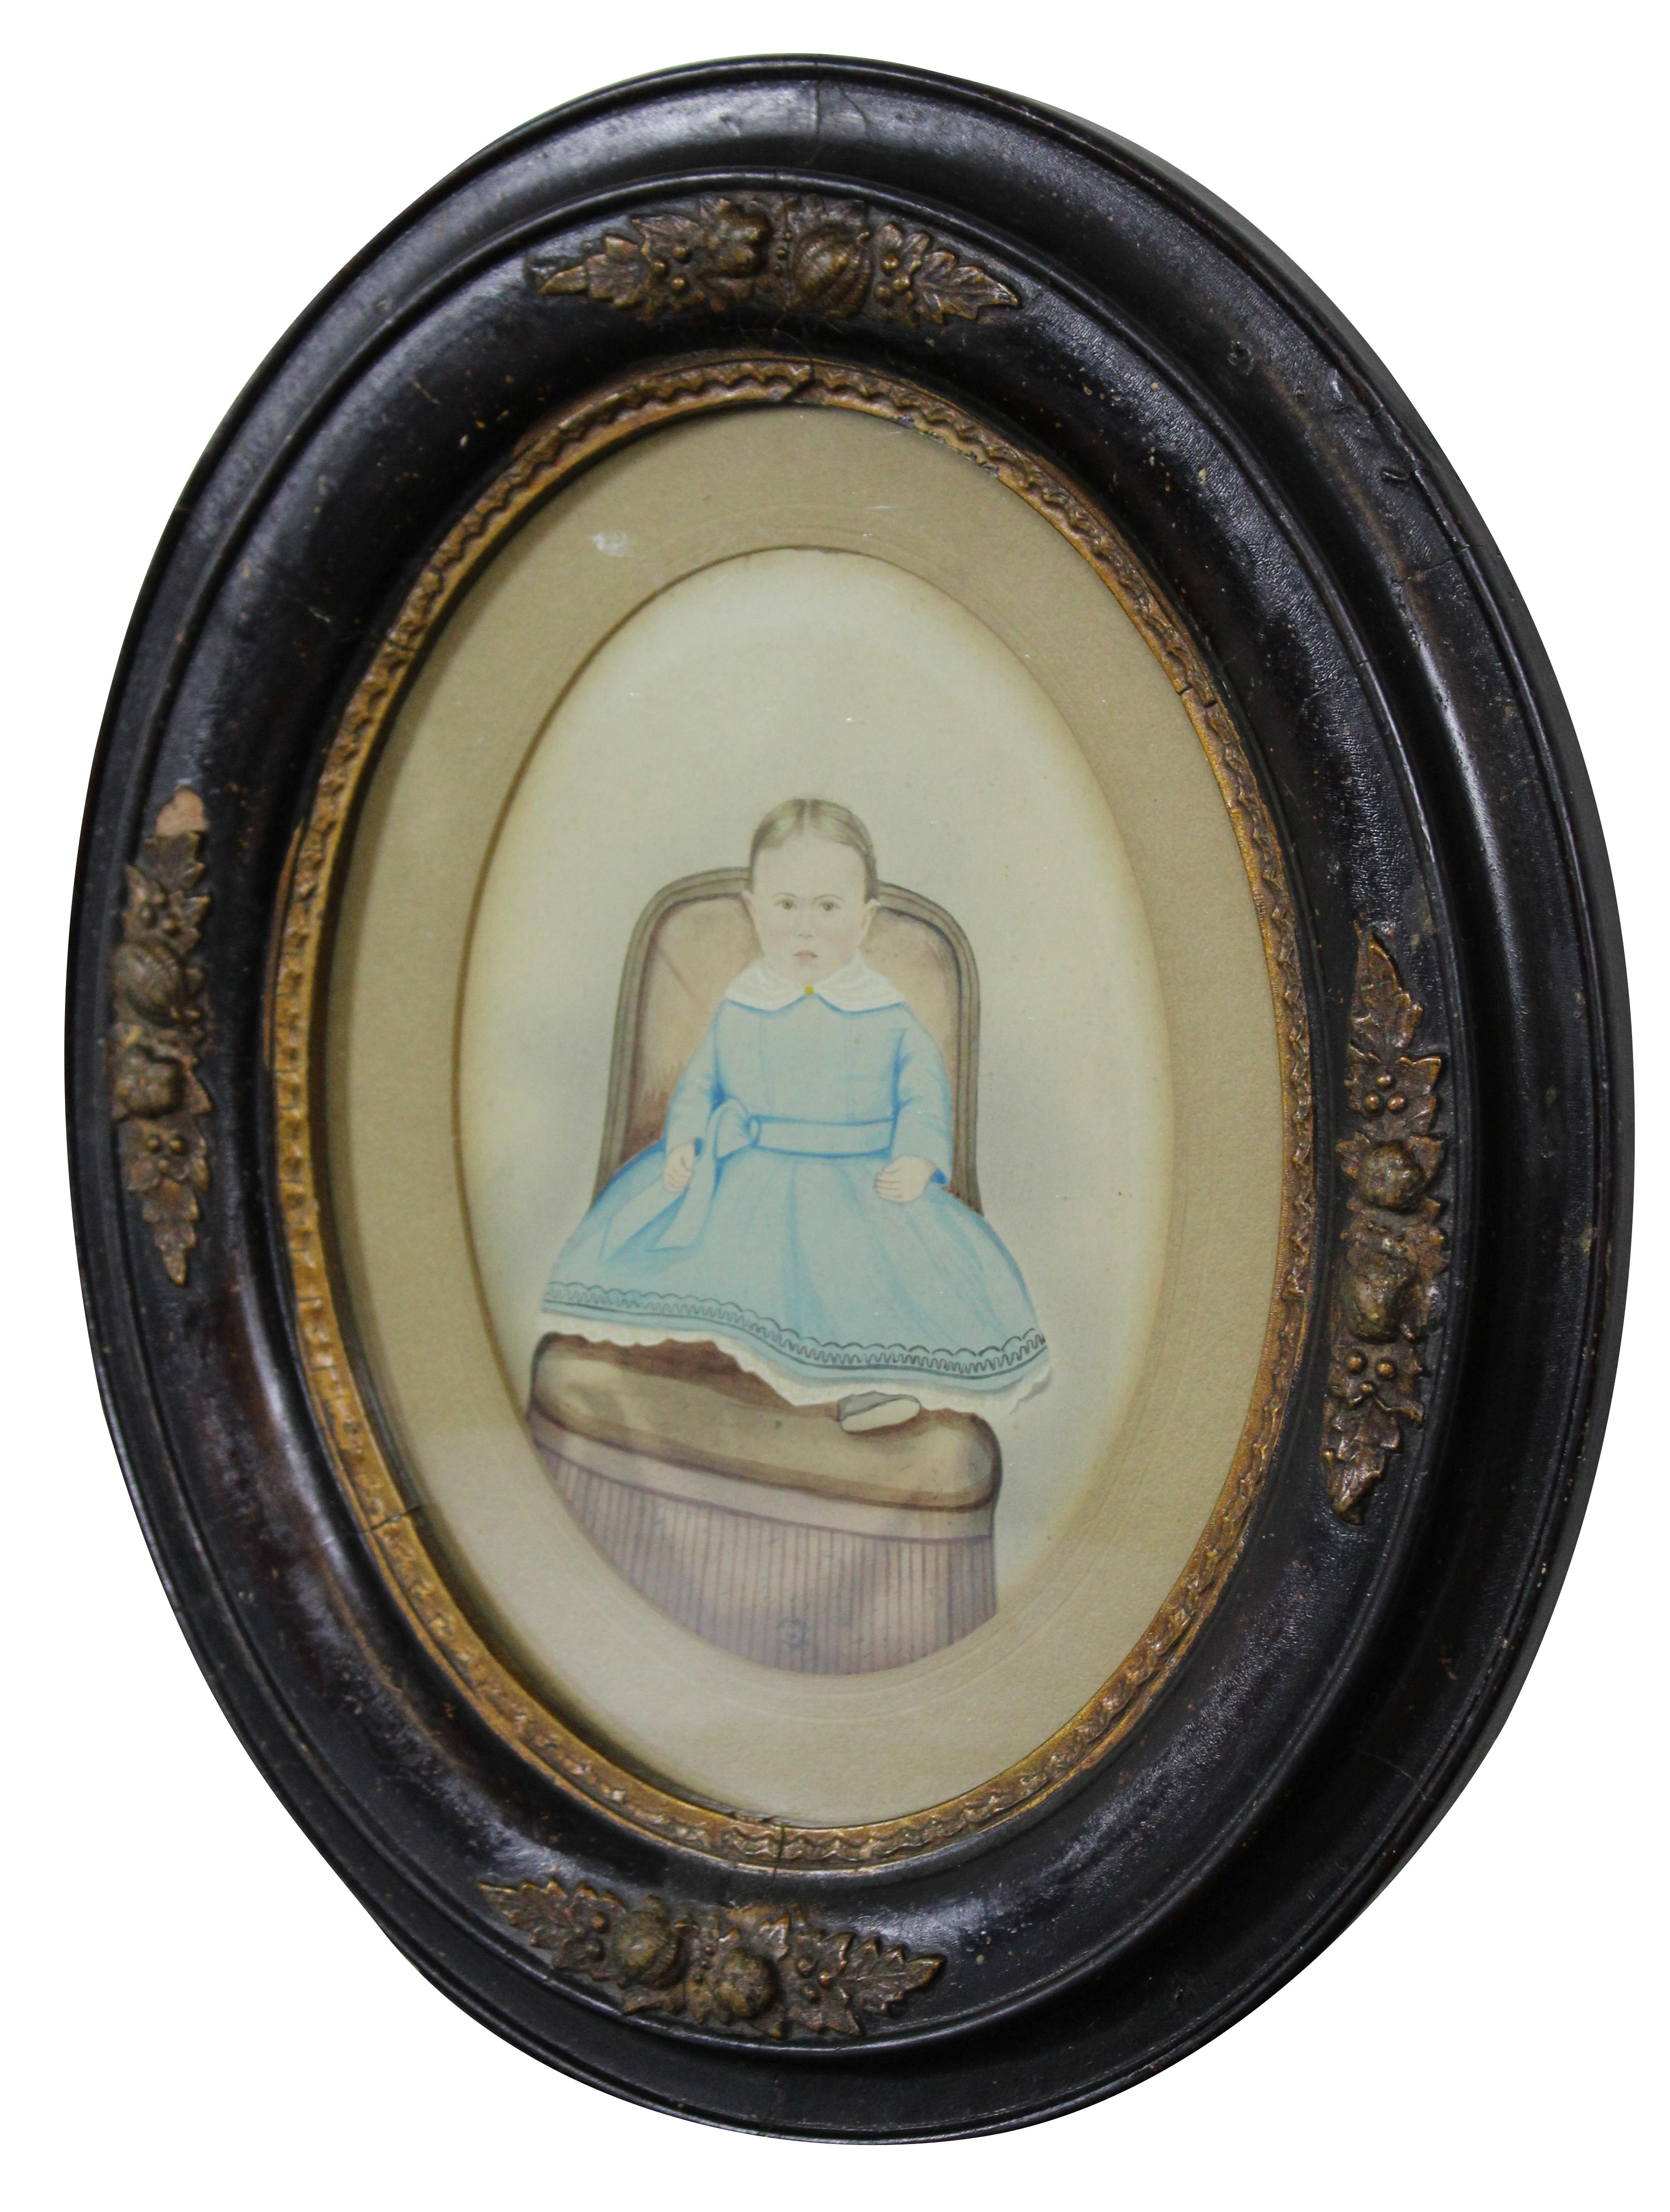 Antique Victorian watercolor portrait painting of an infant in a blue dress seated on a chair, circa 19th century. Framed in an oval setting with a dark wood frame with gold trim. 

Measures: 12” x 1” x 14.25” / Sans Frame - 5.5” x 7.5” (Width x